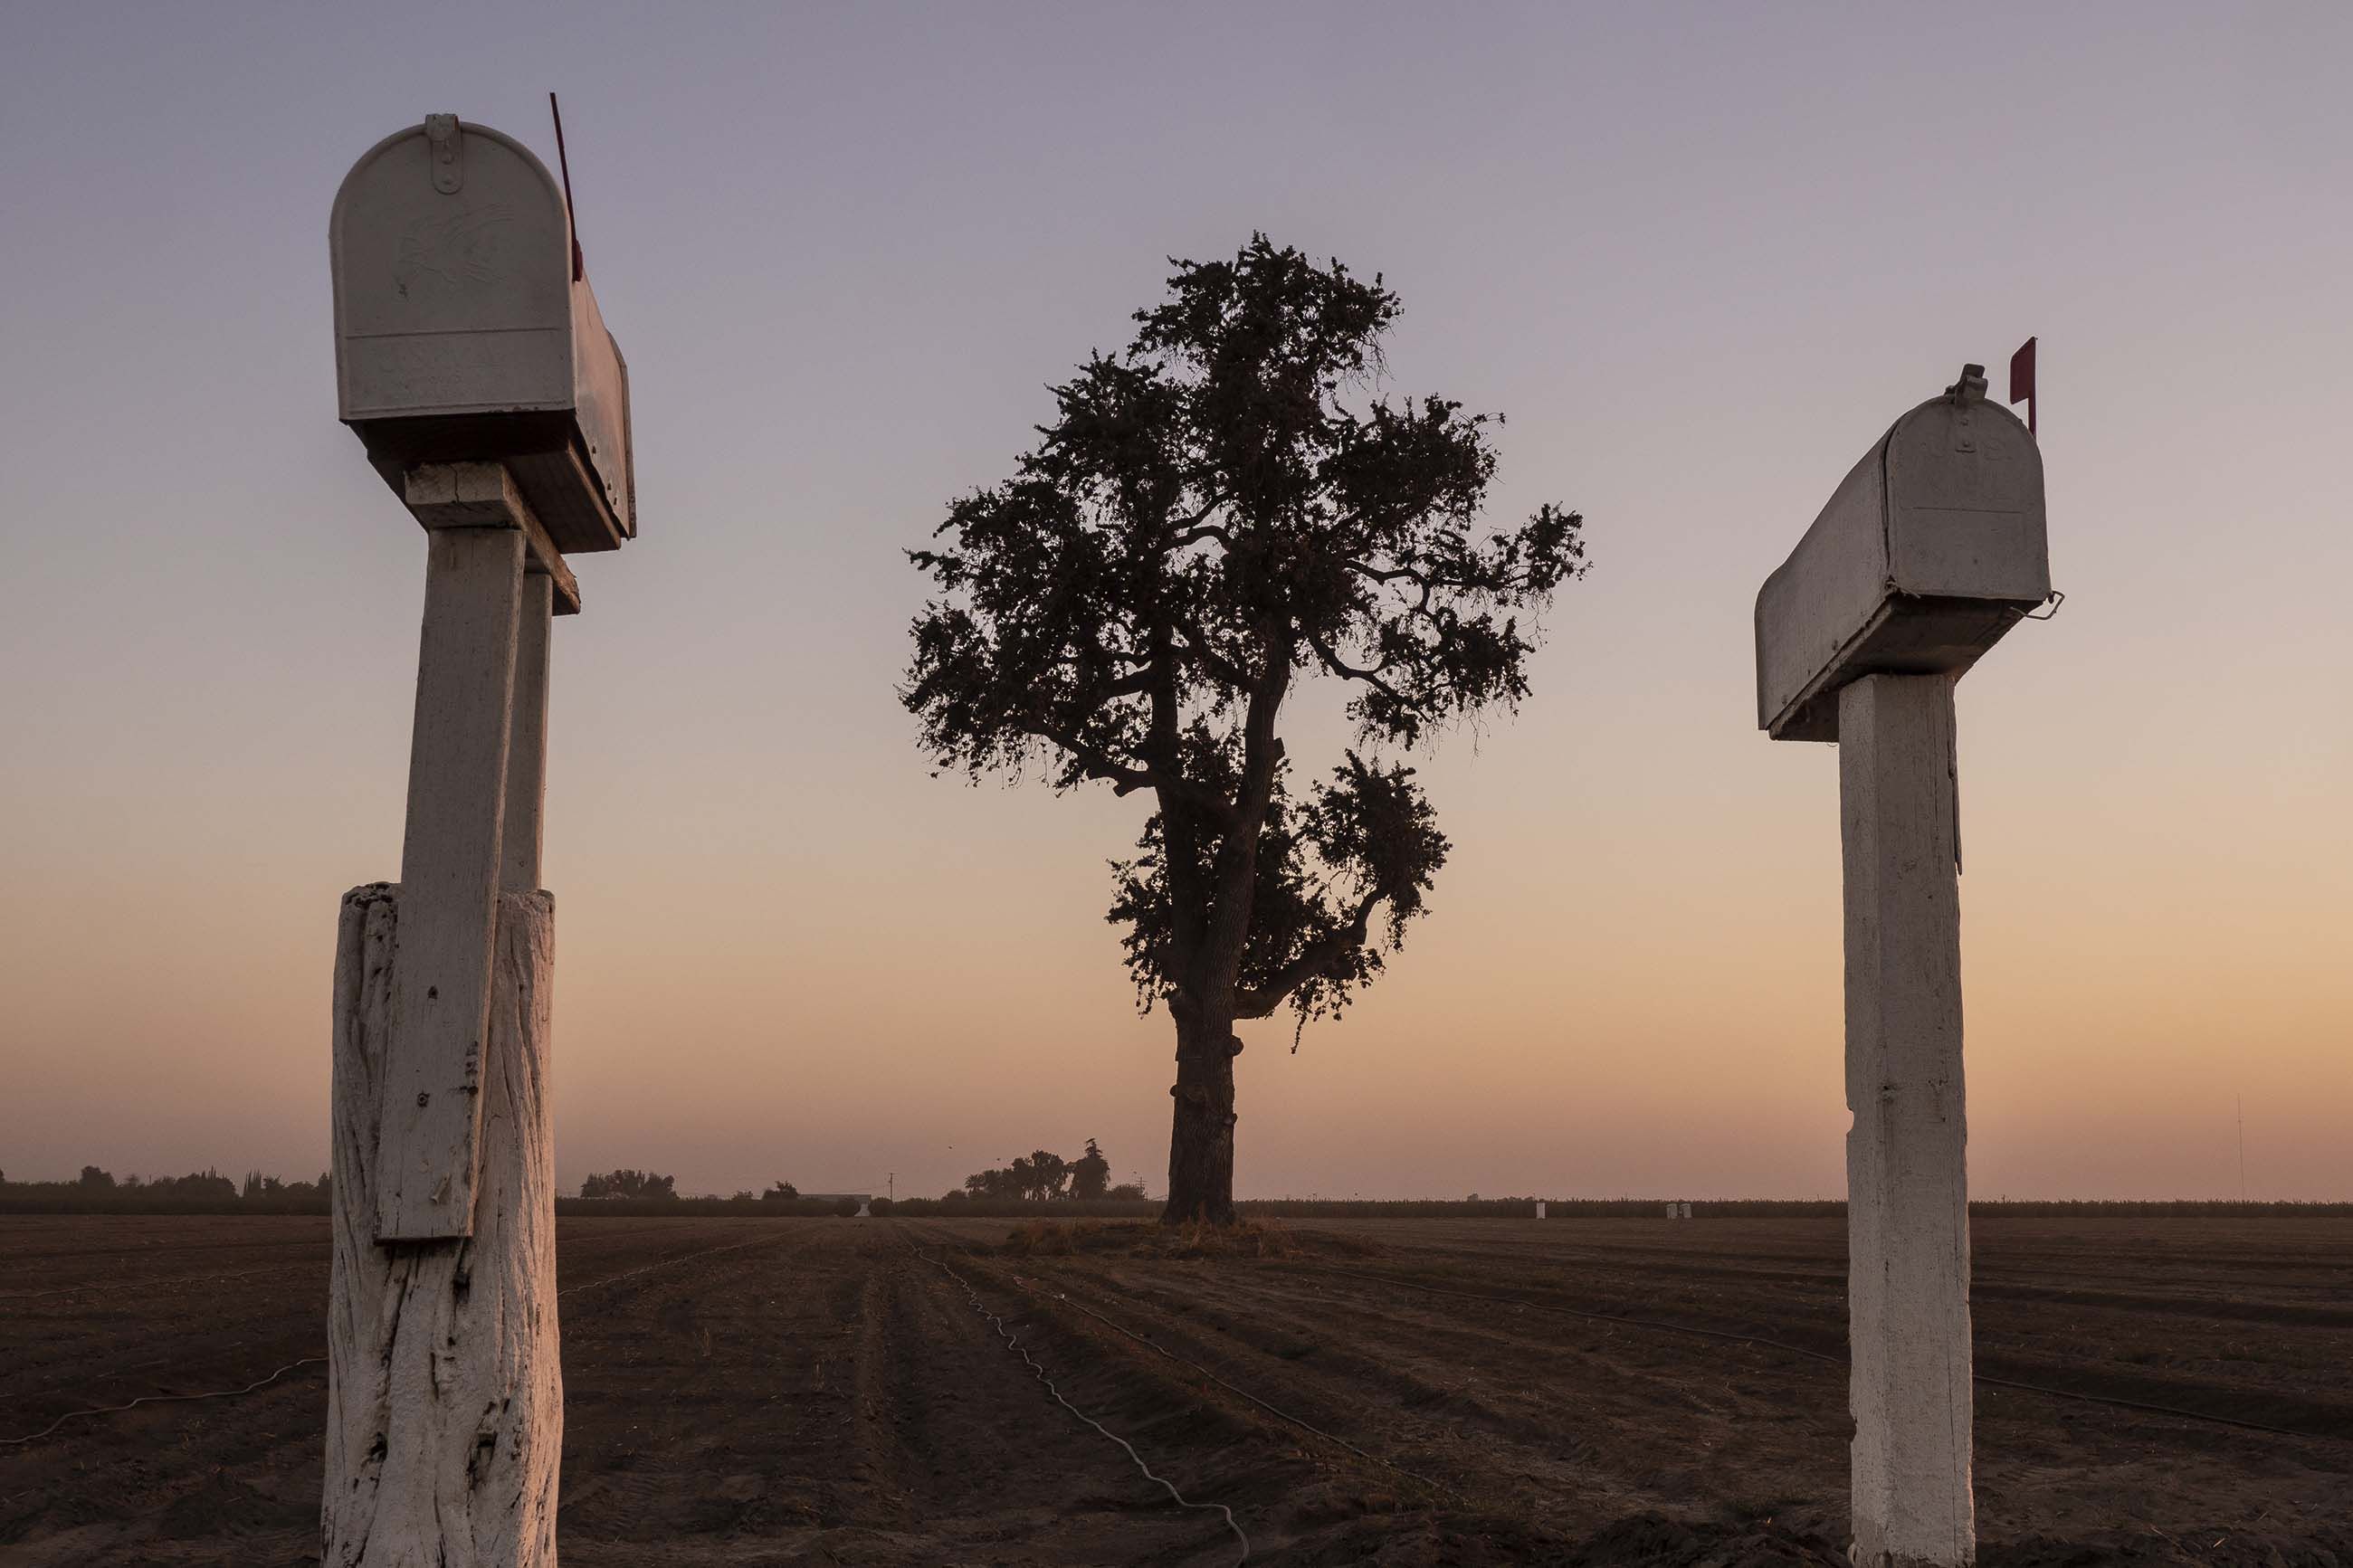 Stretching 250 miles from Bakersfield in the south to Stockton in the north, the San Joaquin comprises the southern two-thirds of the storied Central Valley, a plowed-over promised land that generates more than $17 billion a year in crops. Image by Larry C. Price. California, 2018.